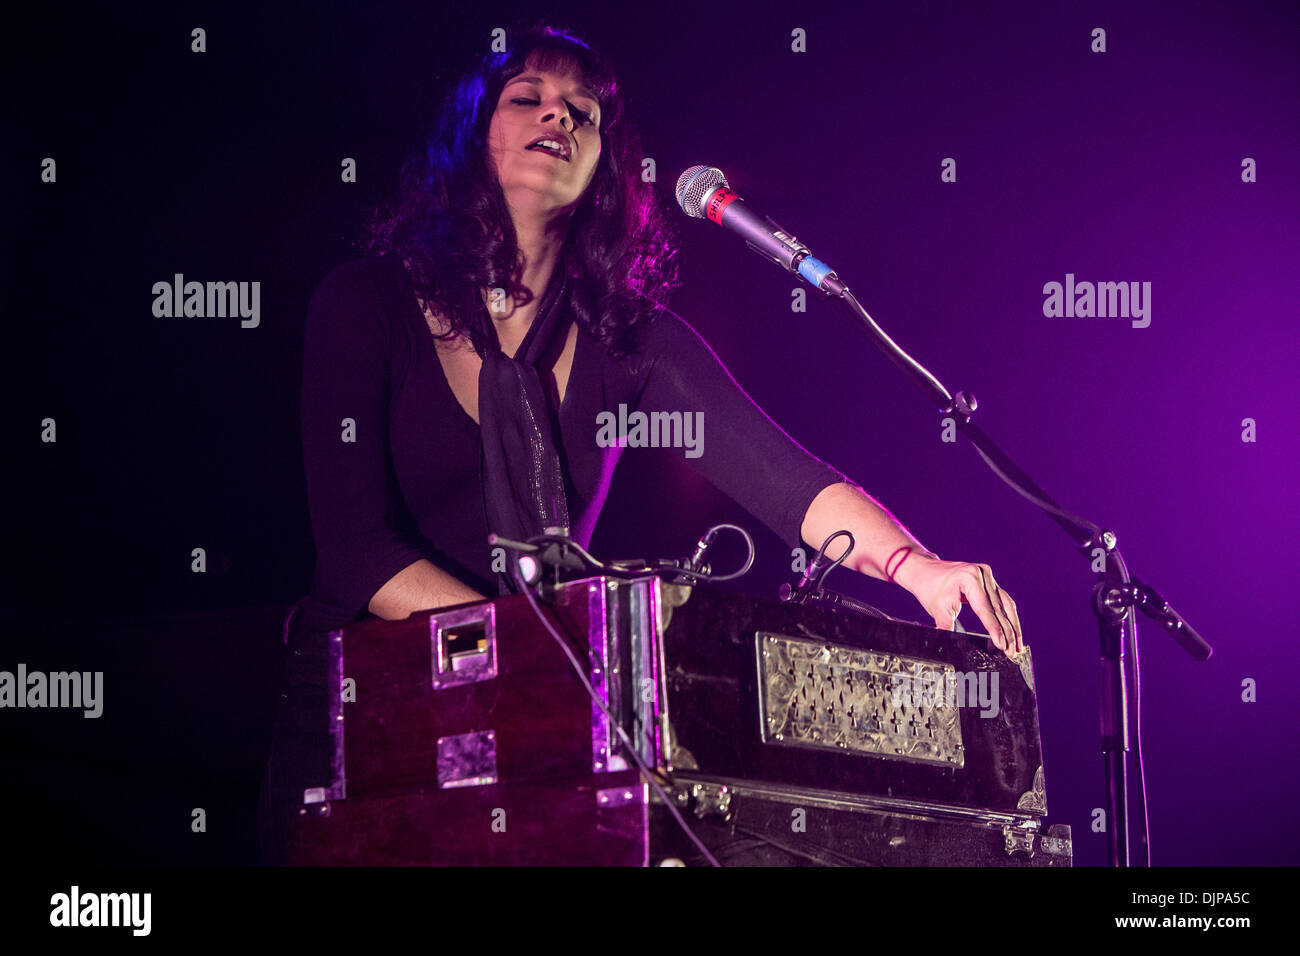 Milan Italy. 28th November 2013. SHILPA RAY performs live at the music club Alcatraz opening the show of Nick Cave & The Bad Seeds Credit:  Rodolfo Sassano/Alamy Live News Stock Photo